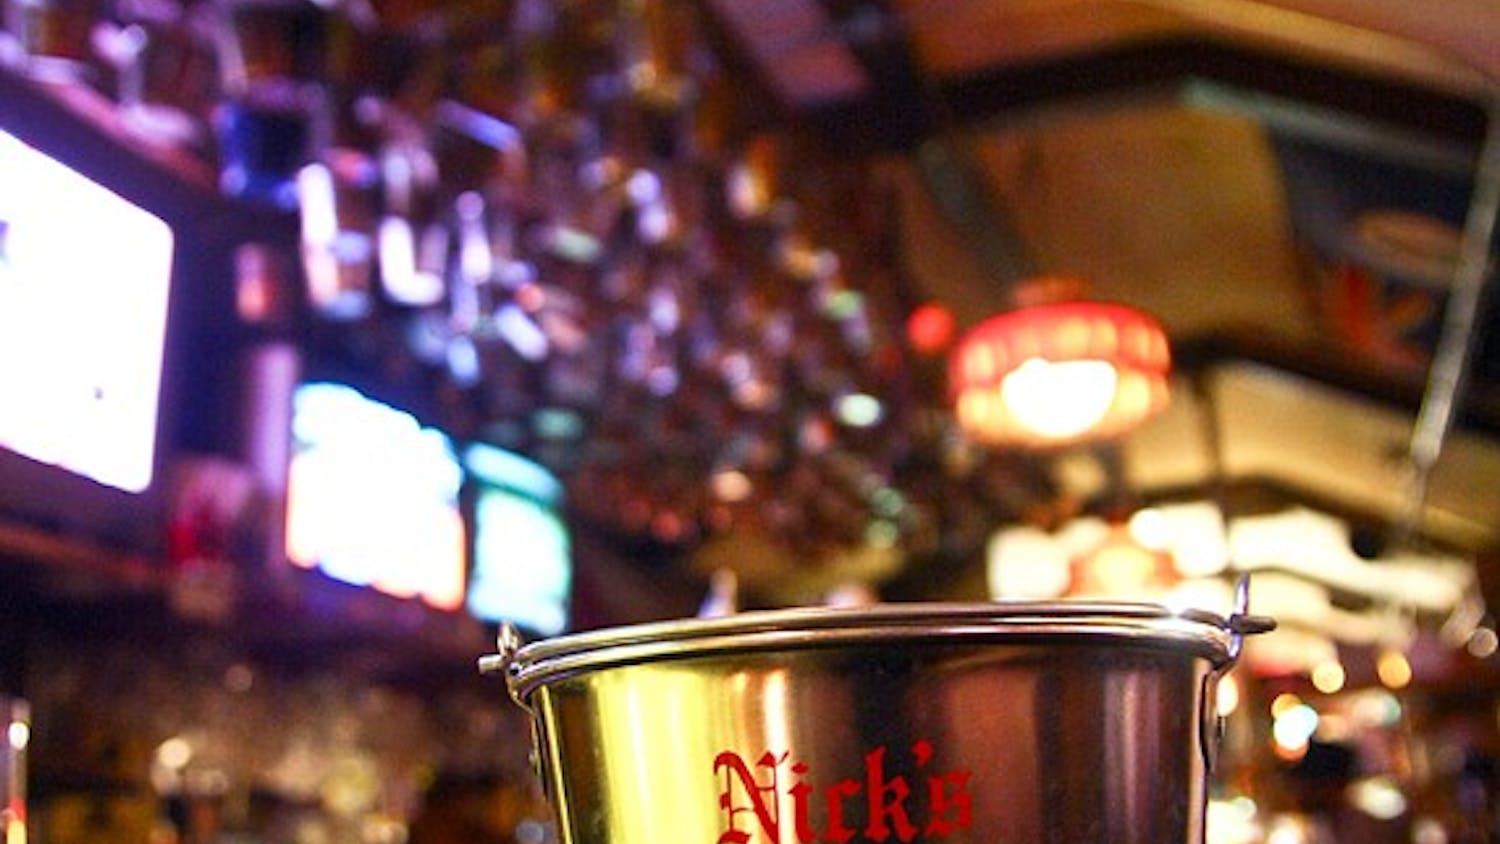 Chris Pickrell • Weekend
Nick's English Hut on Kirkwood Avenue features food, drinks and games.